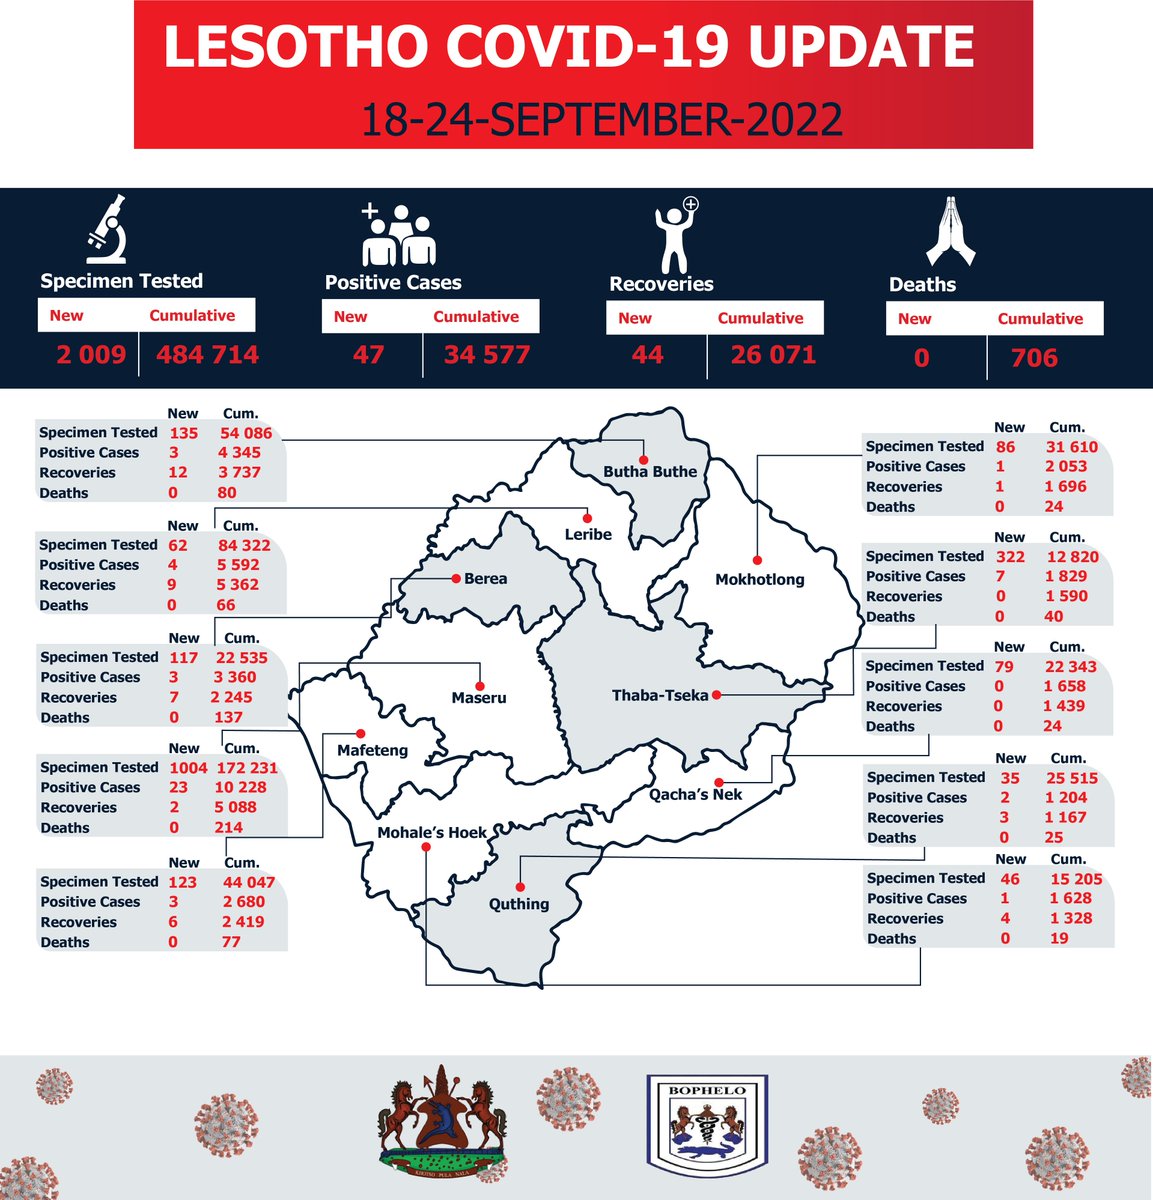 Lesotho COVID-19 Statistics as at 18th - 24th September 2022.
#MaskUp
#StaySafe 
#COVIDLesotho
#VforVaccinate